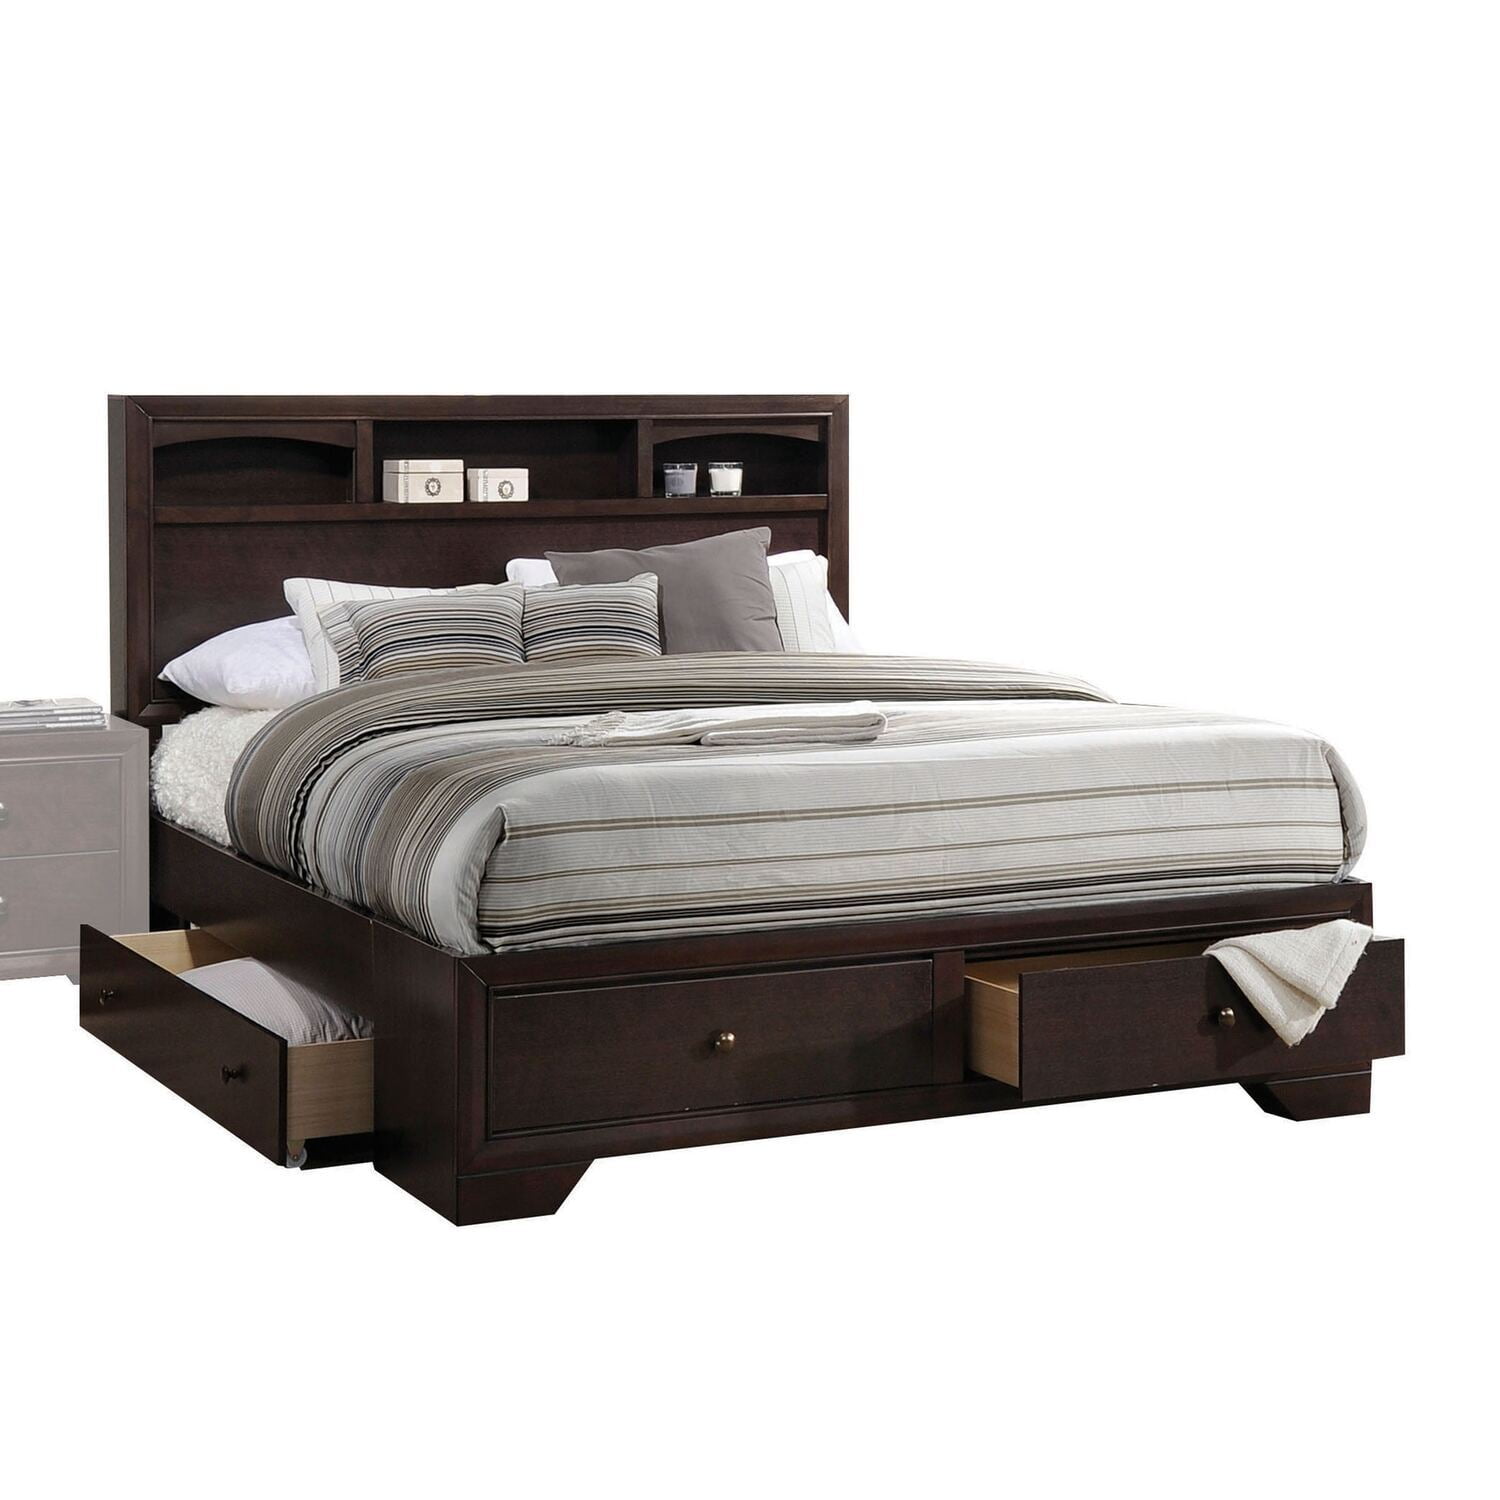 Picture of ACME 19557EK 3 Piece Madison II Eastern King Size Bed with Storage - Espresso